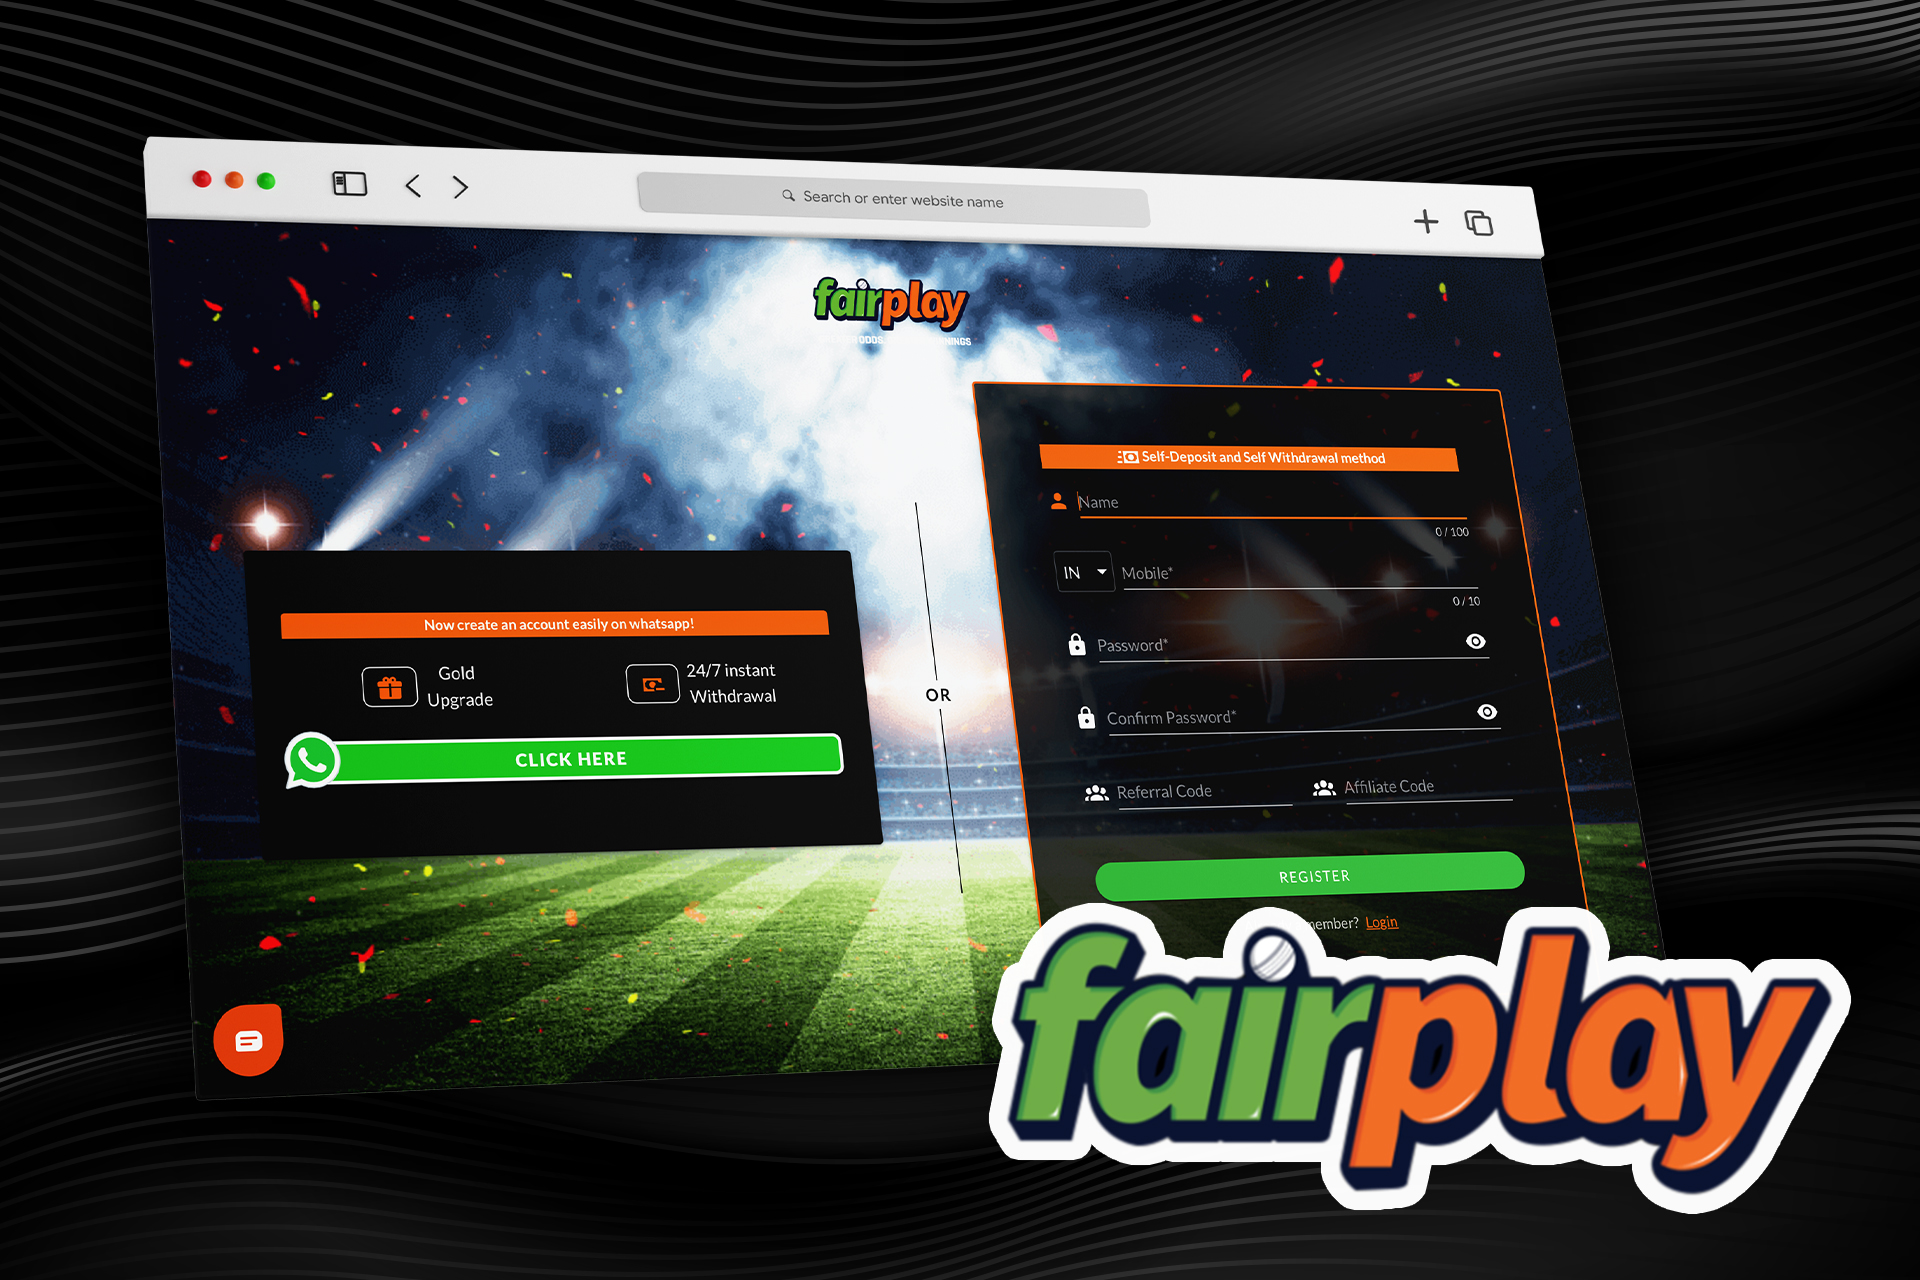 Open the Fairplay website and sign up for it.